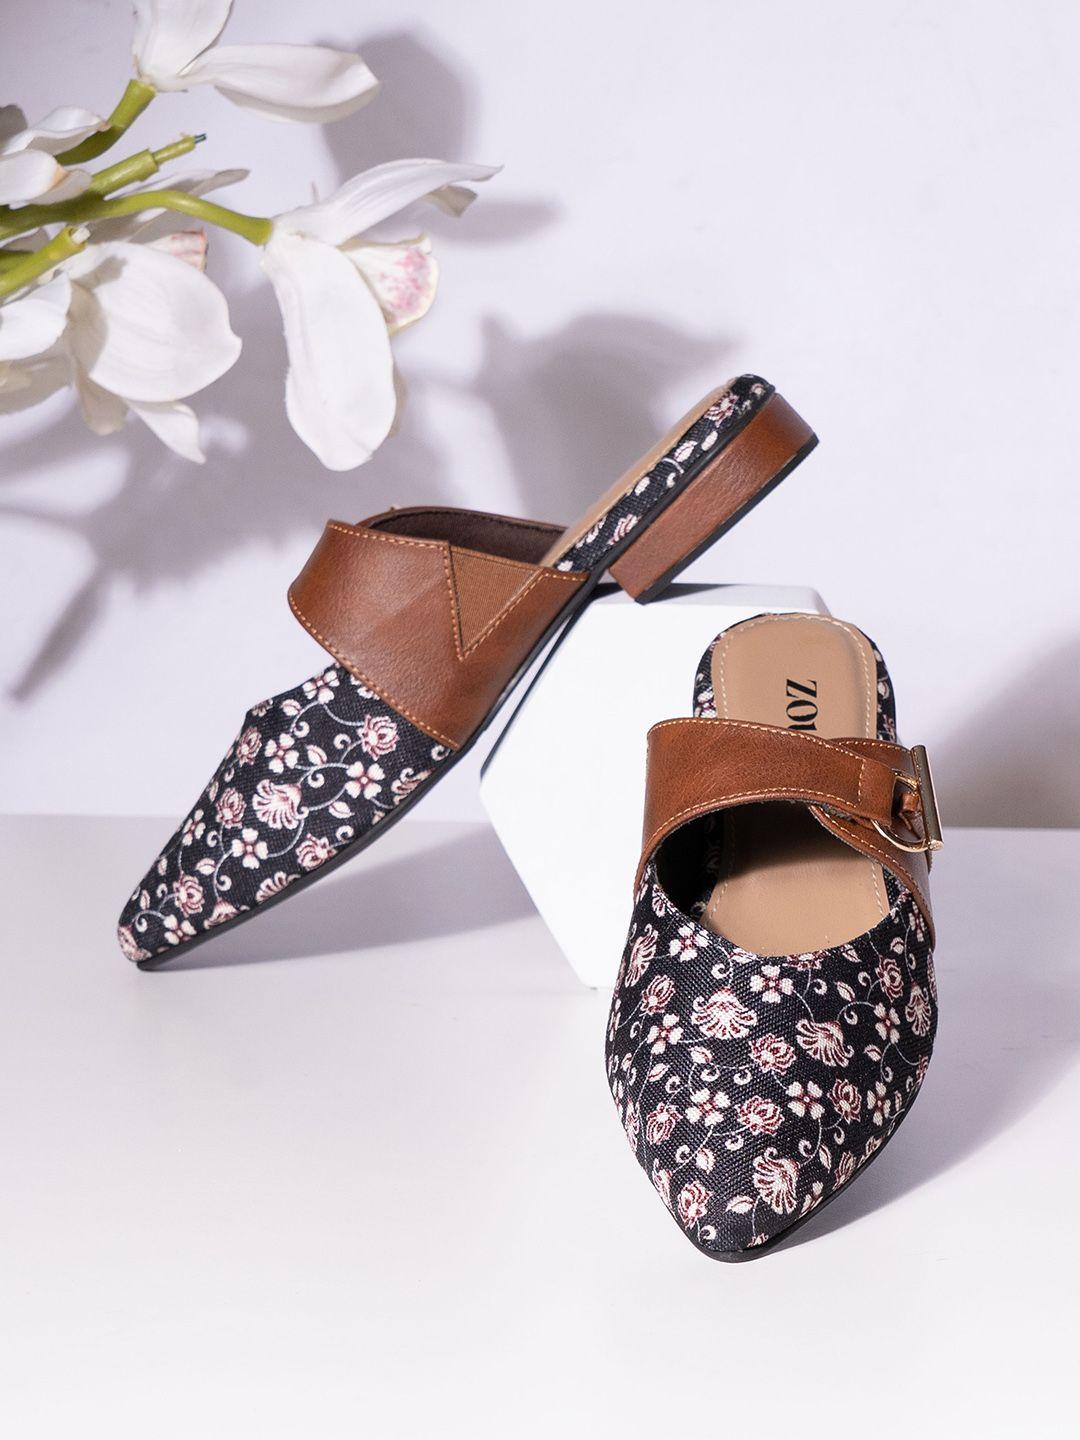 zouk hooghly pointed toe embellished printed vegan leather work mules